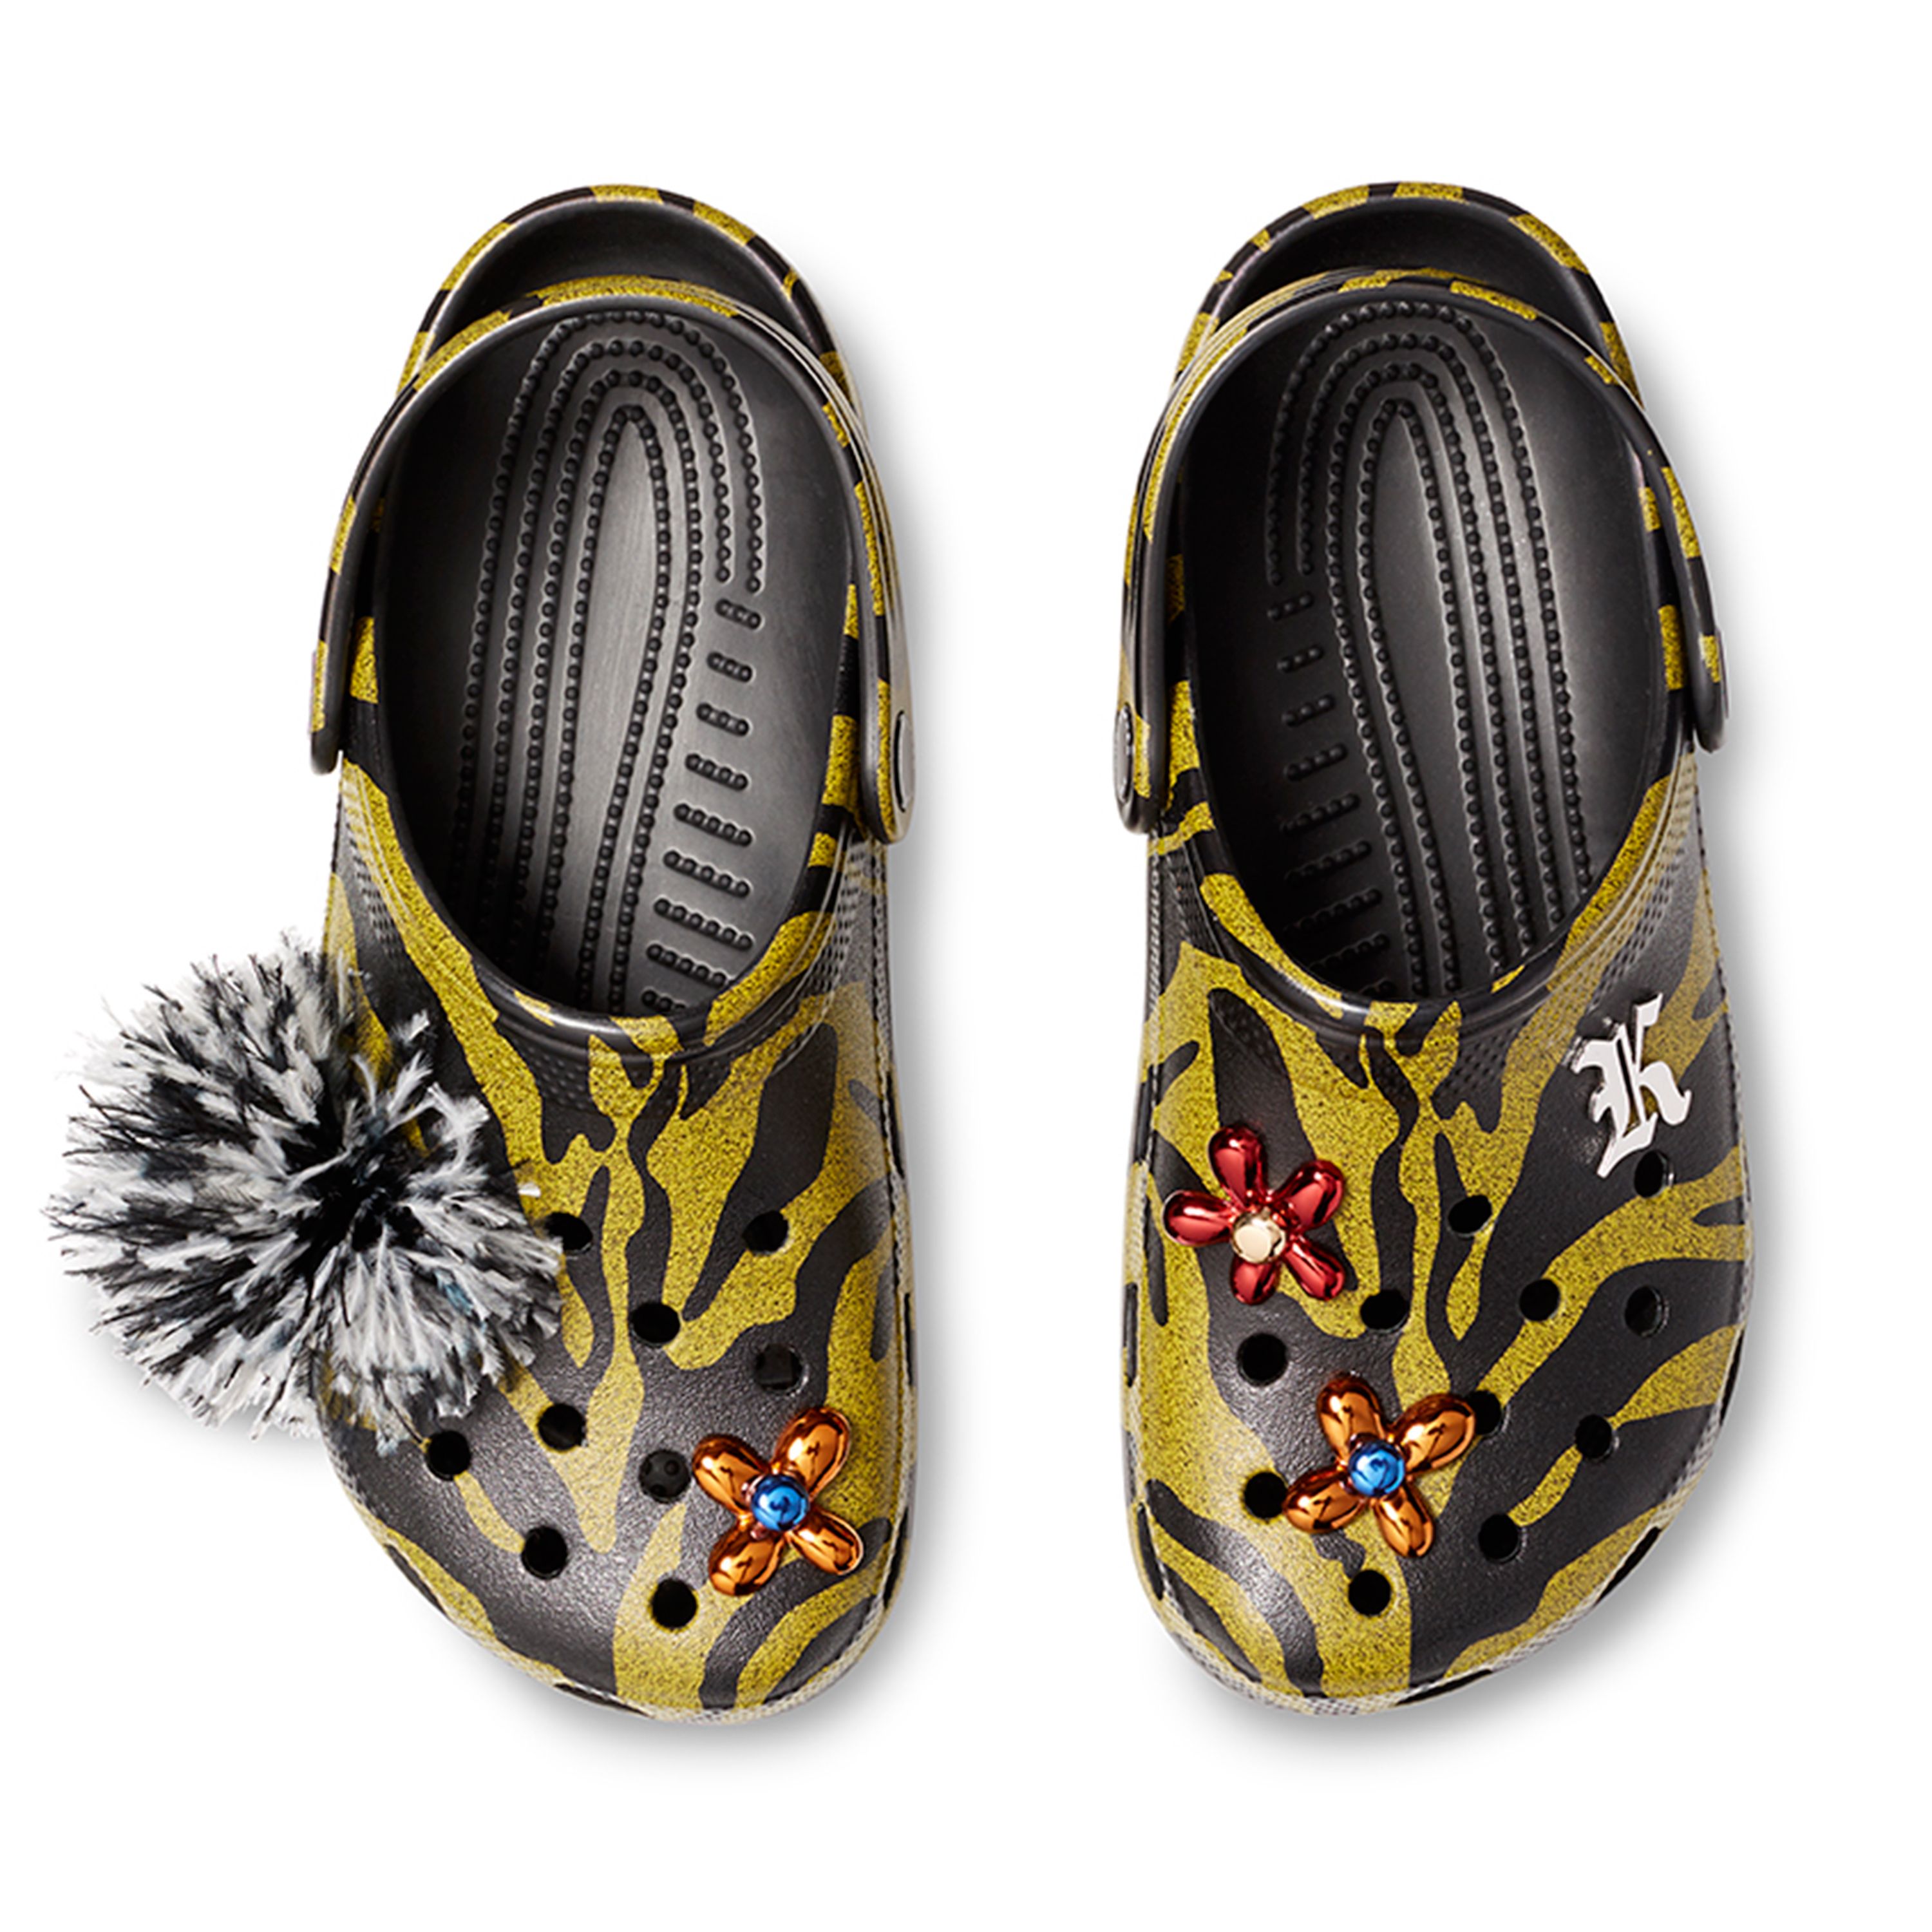 Christopher Kane continues with crocs quest